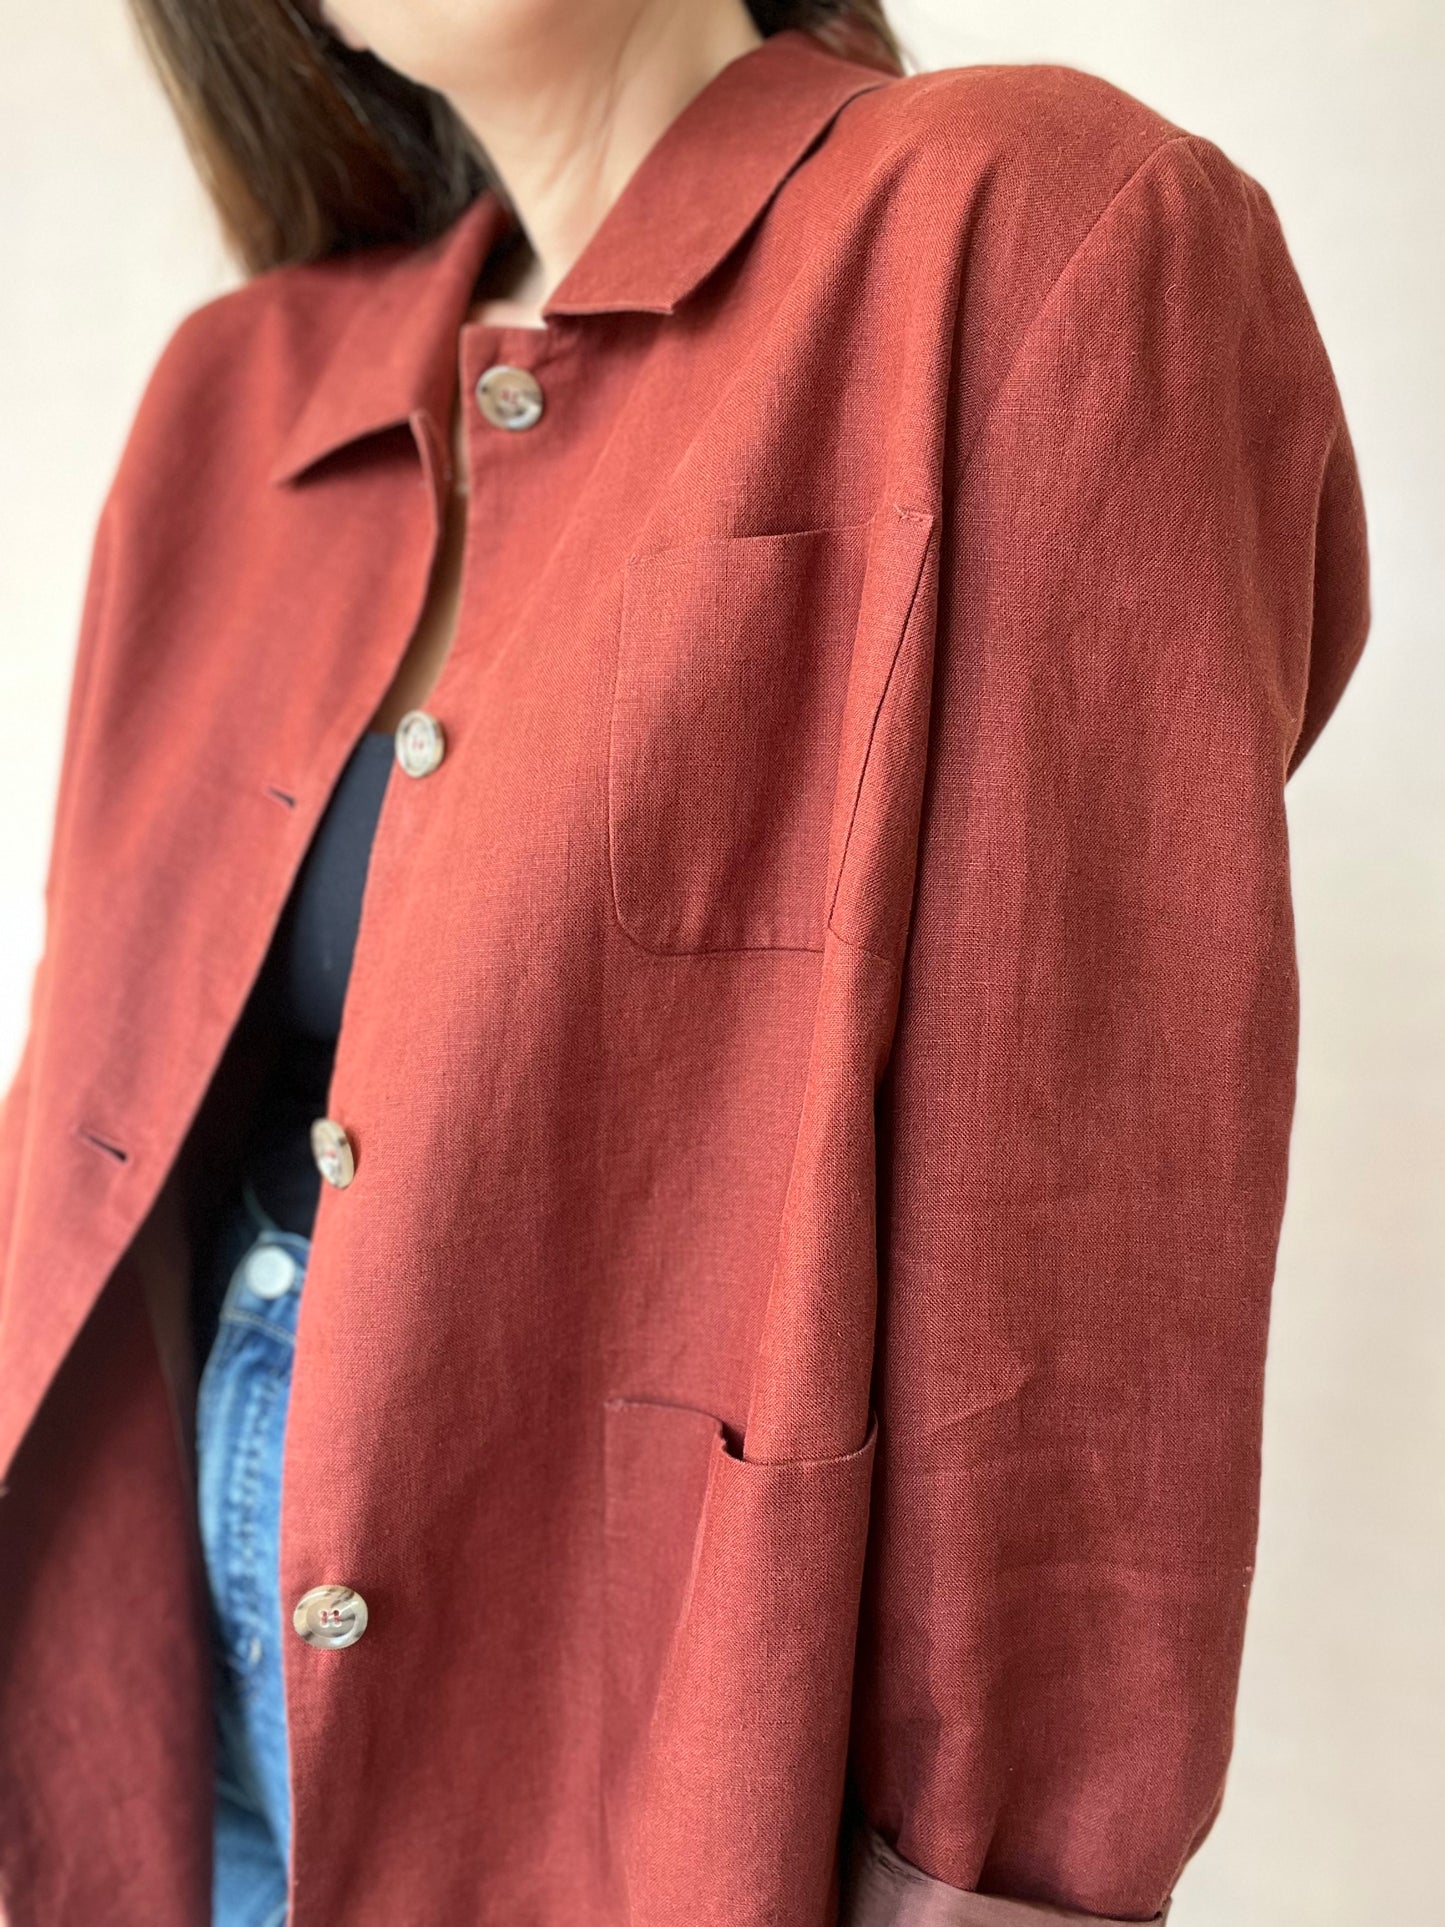 Rusted Copper 100% Linen Jacket - Size XXL